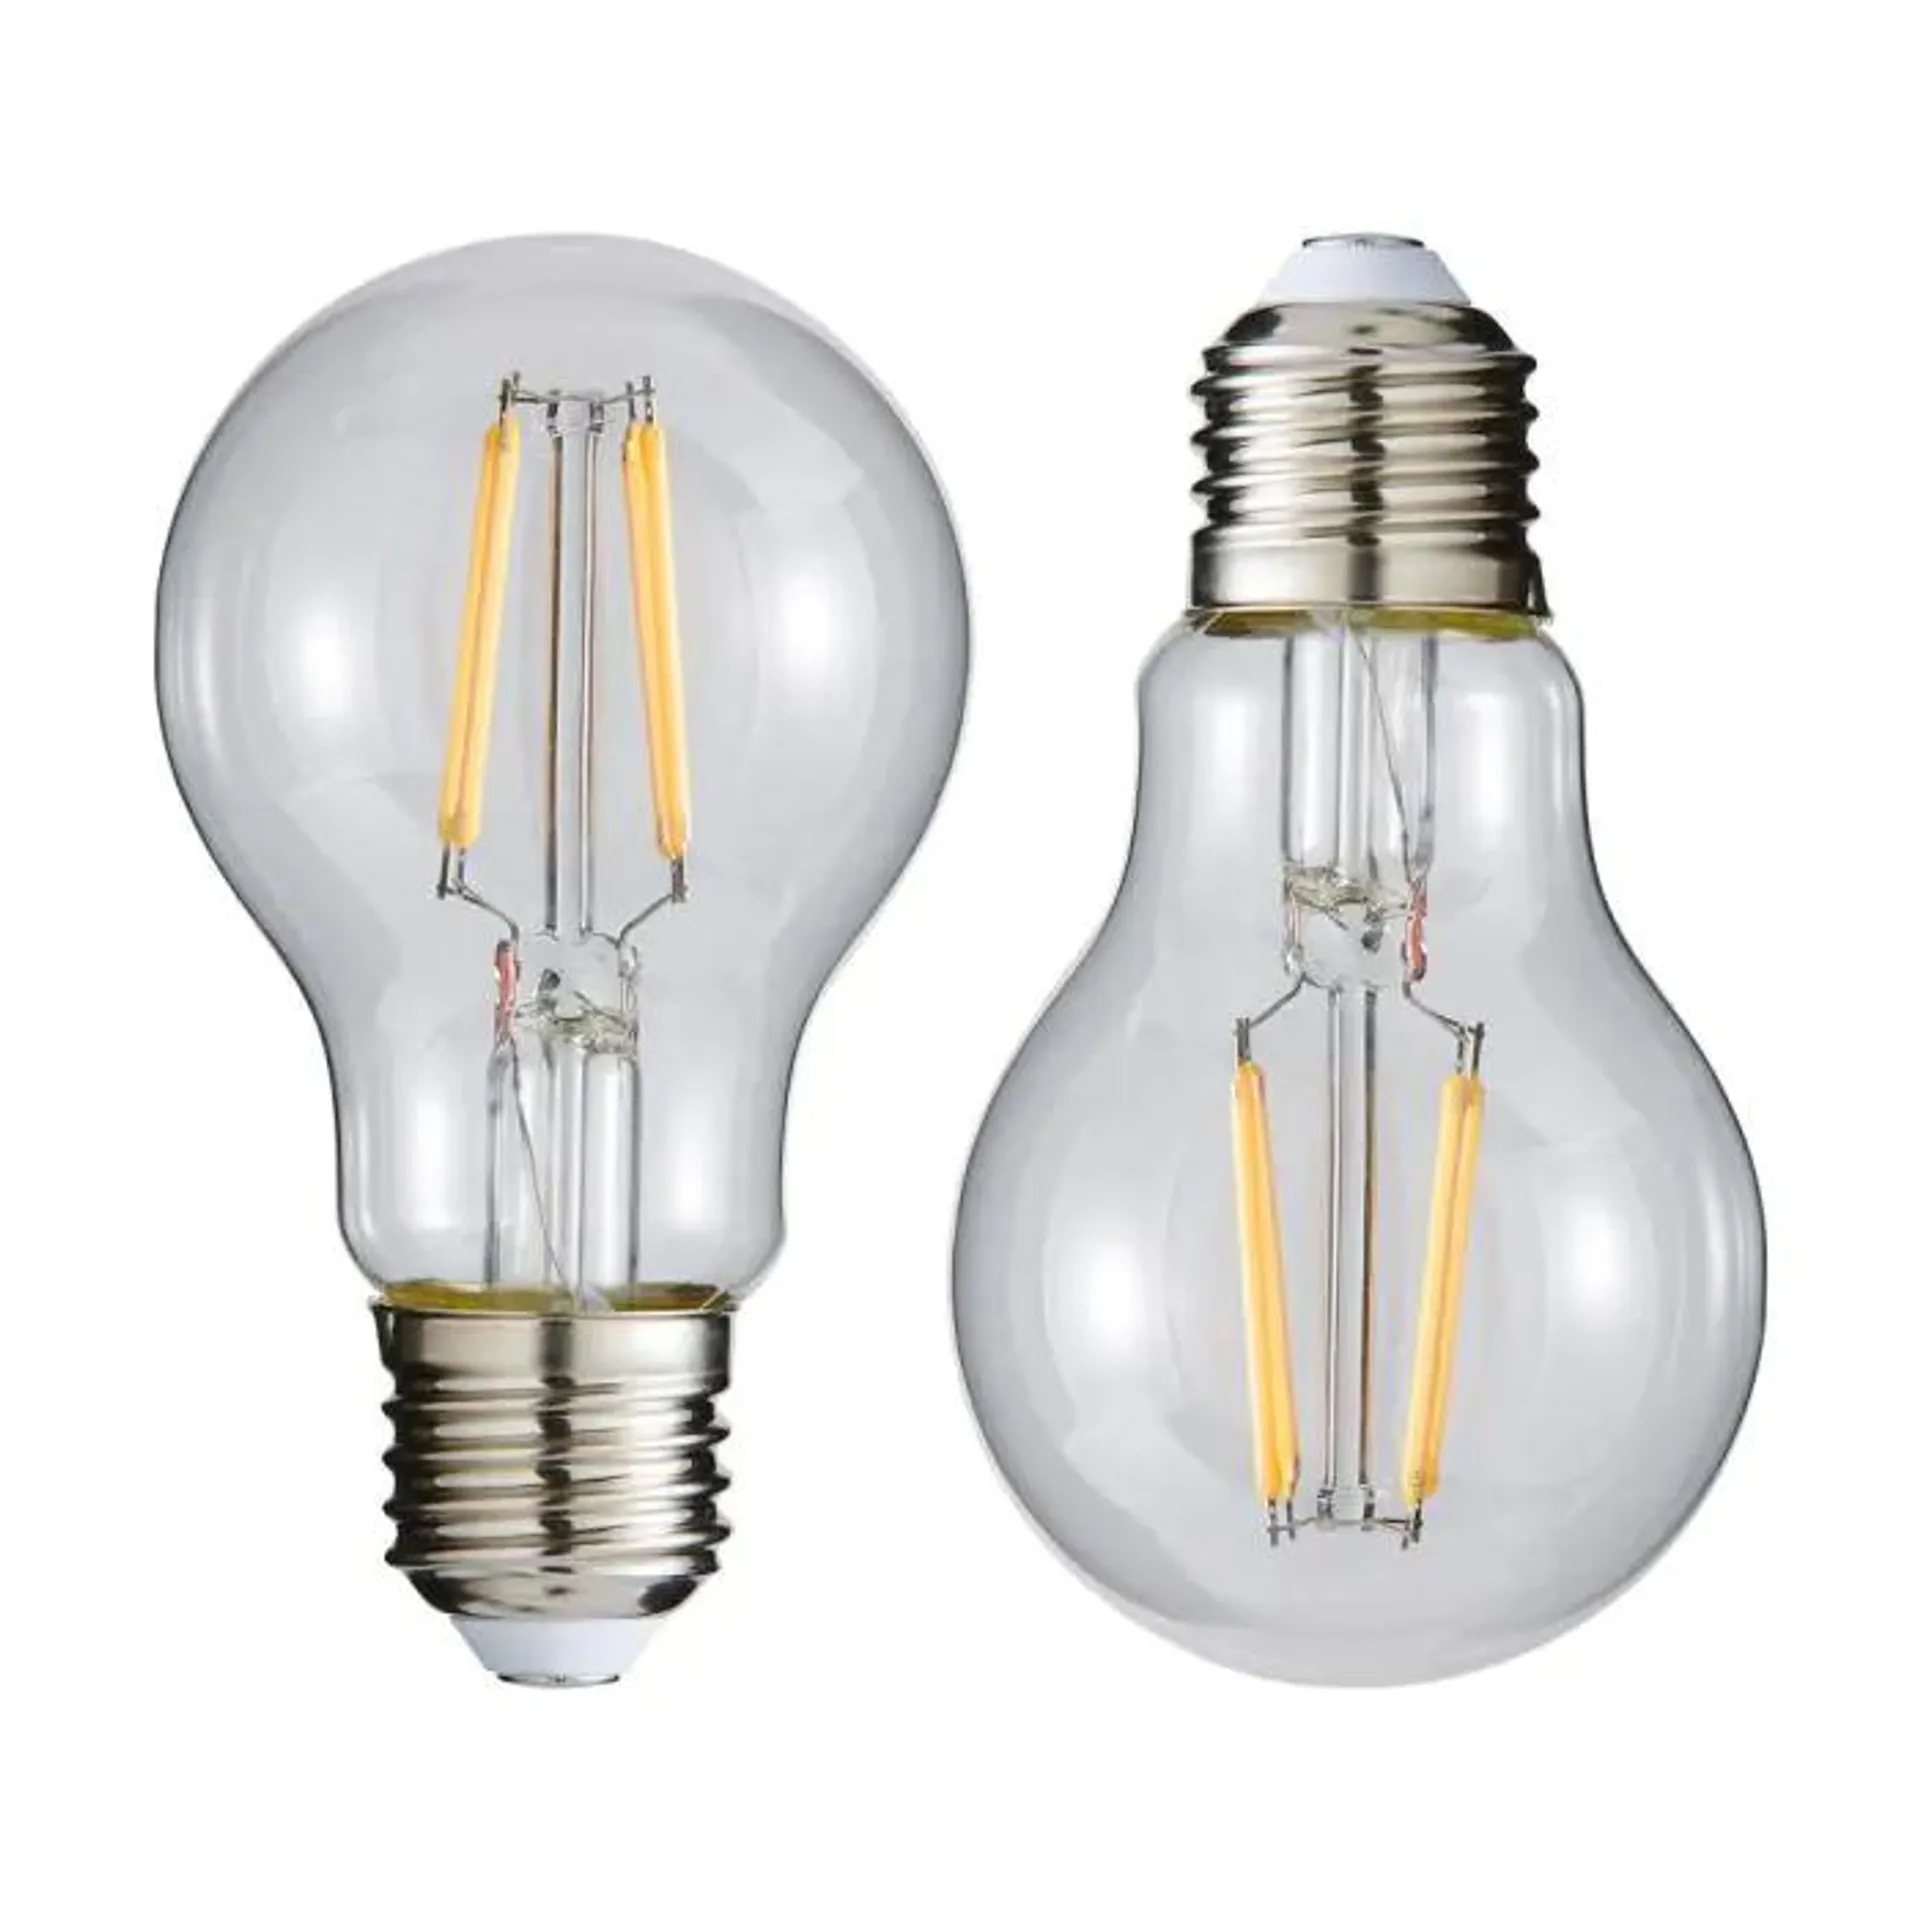 2 Pack of 6W LED Vintage Style ES E27 Classic Light Bulb, Natural White